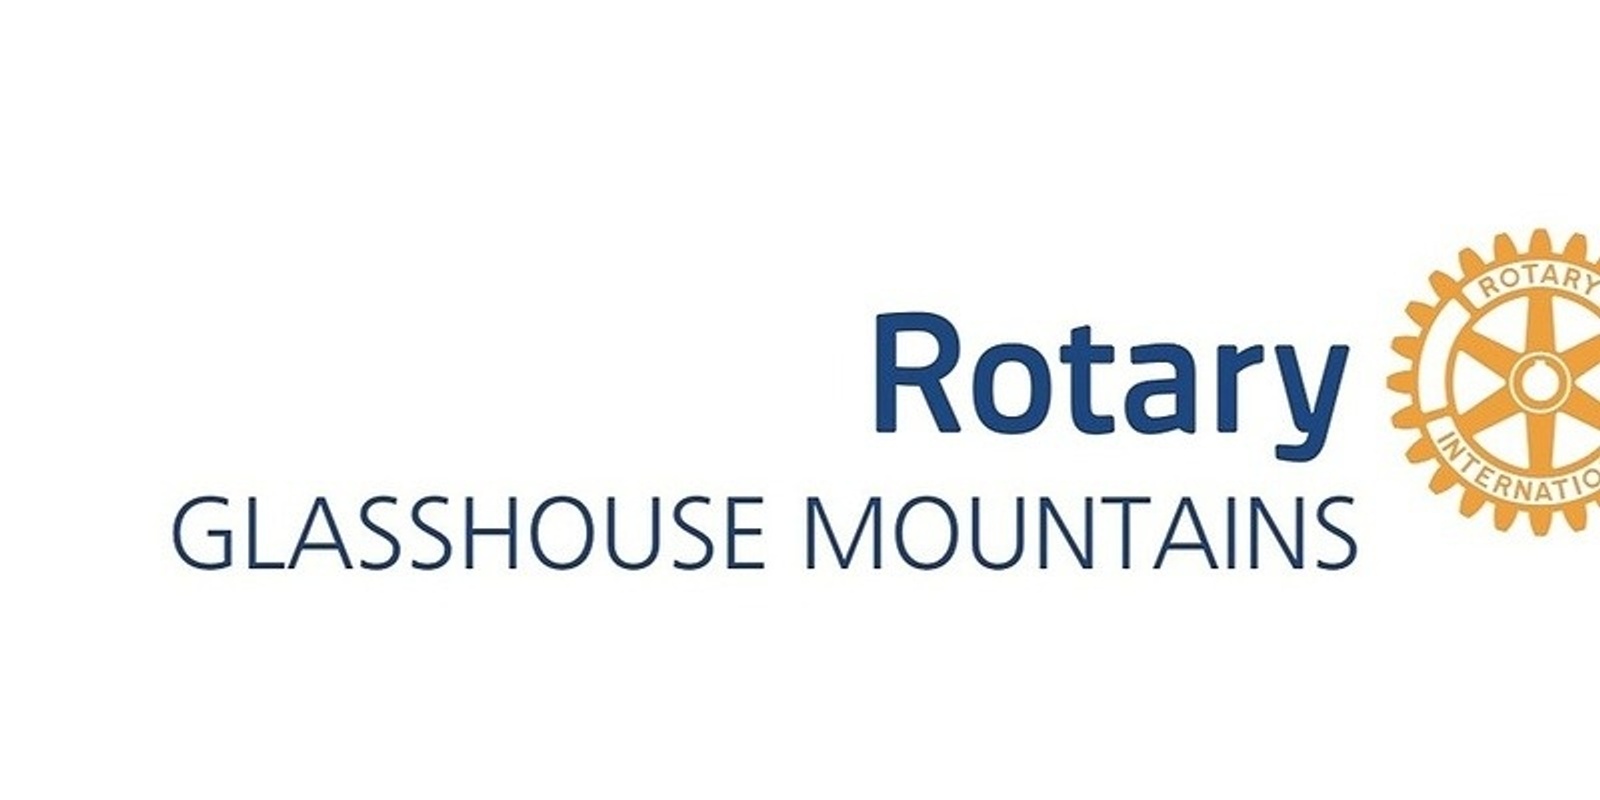 Banner image for 20th Anniversary Rotary Club Glasshouse Mountains